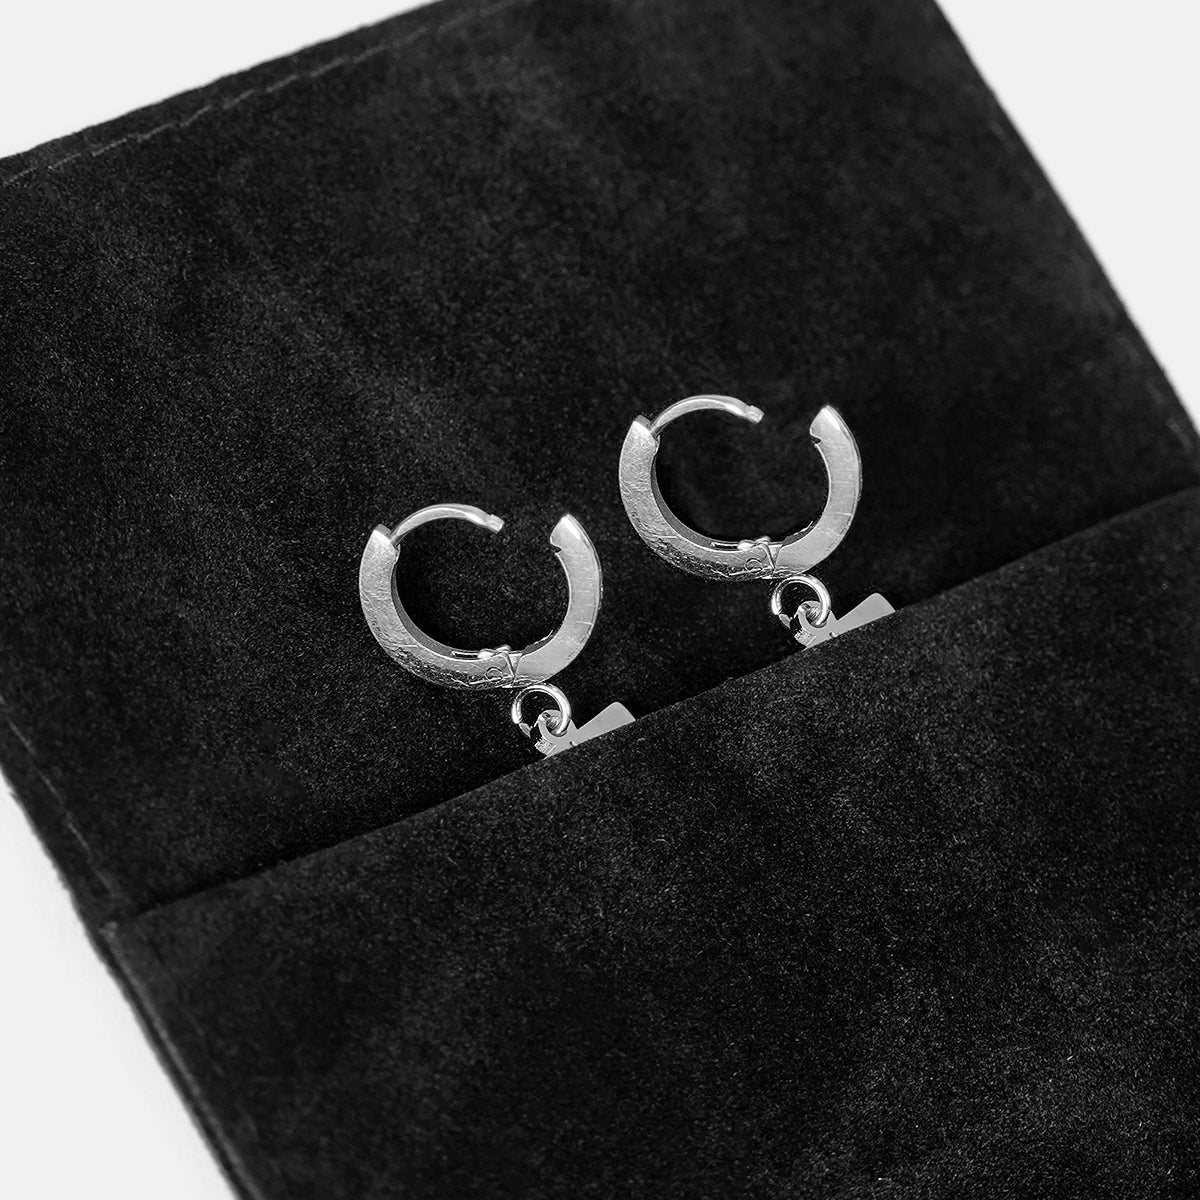 72 Number Earring - Stainless Steel